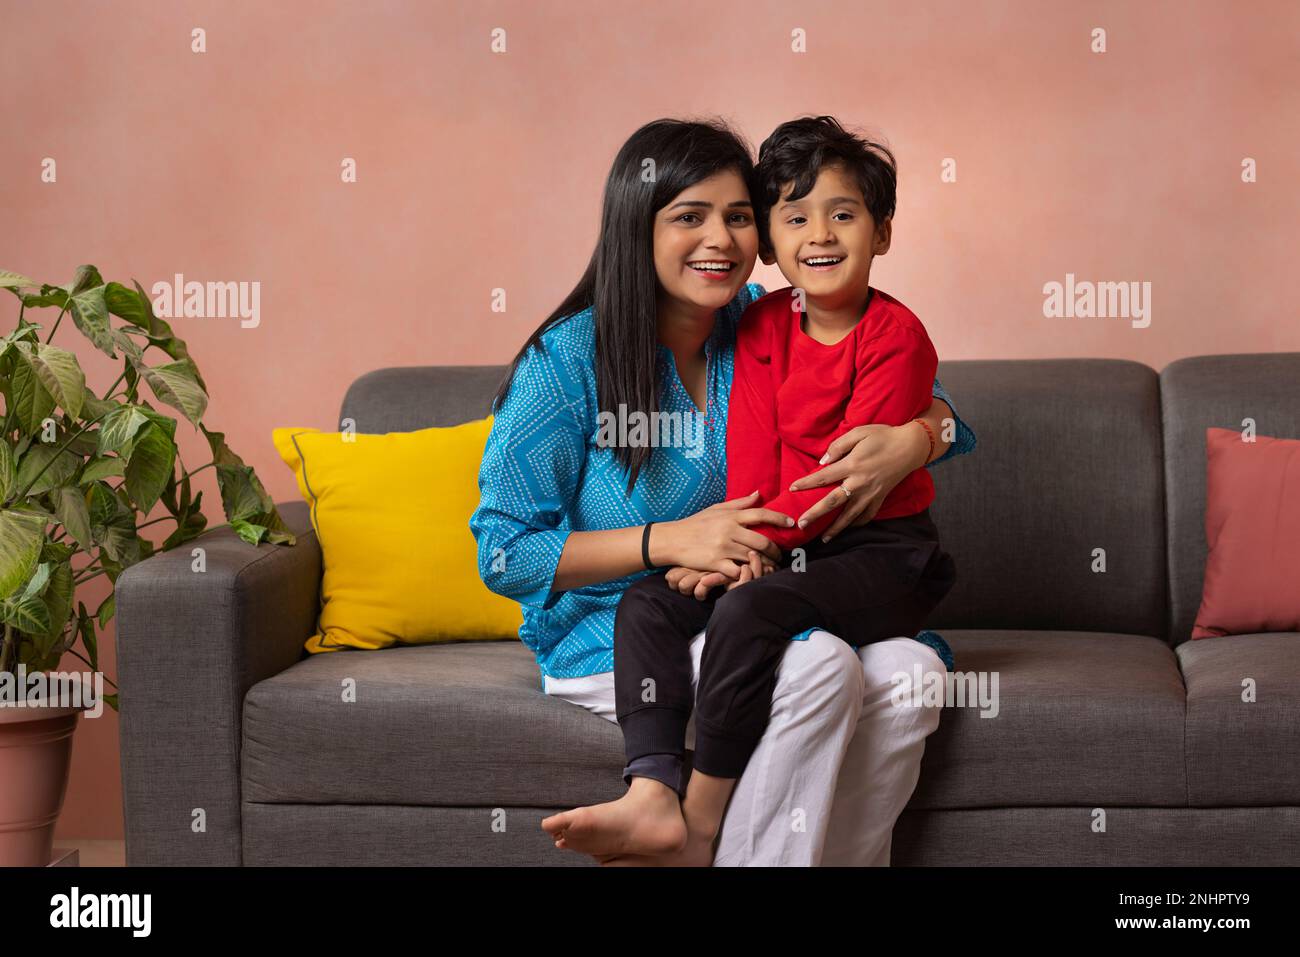 Portrait of happy mother and son sitting on sofa in living room Stock Photo